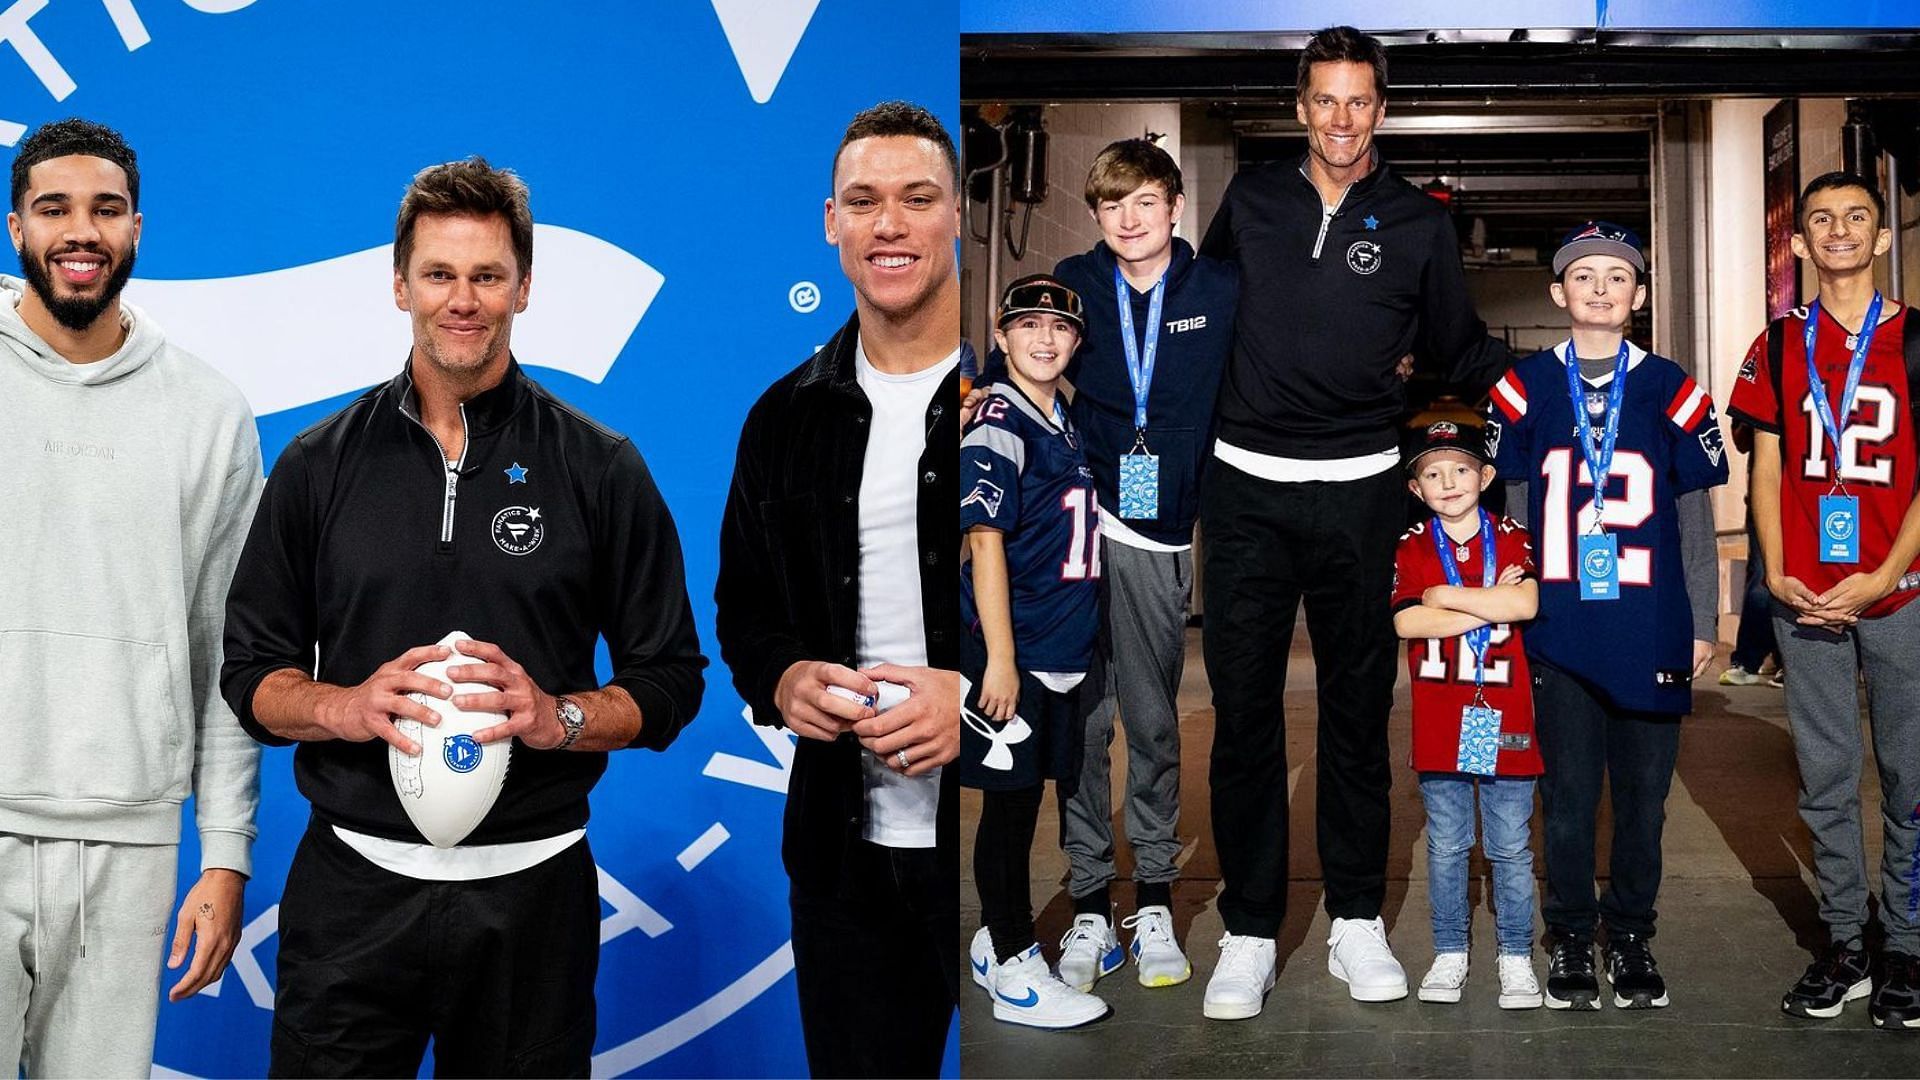 Tom Brady with Jason Tatum, Aaron Judge, and some young benefactors at the Fanatics/Make-A-Wish partnership launch (via Instagram)